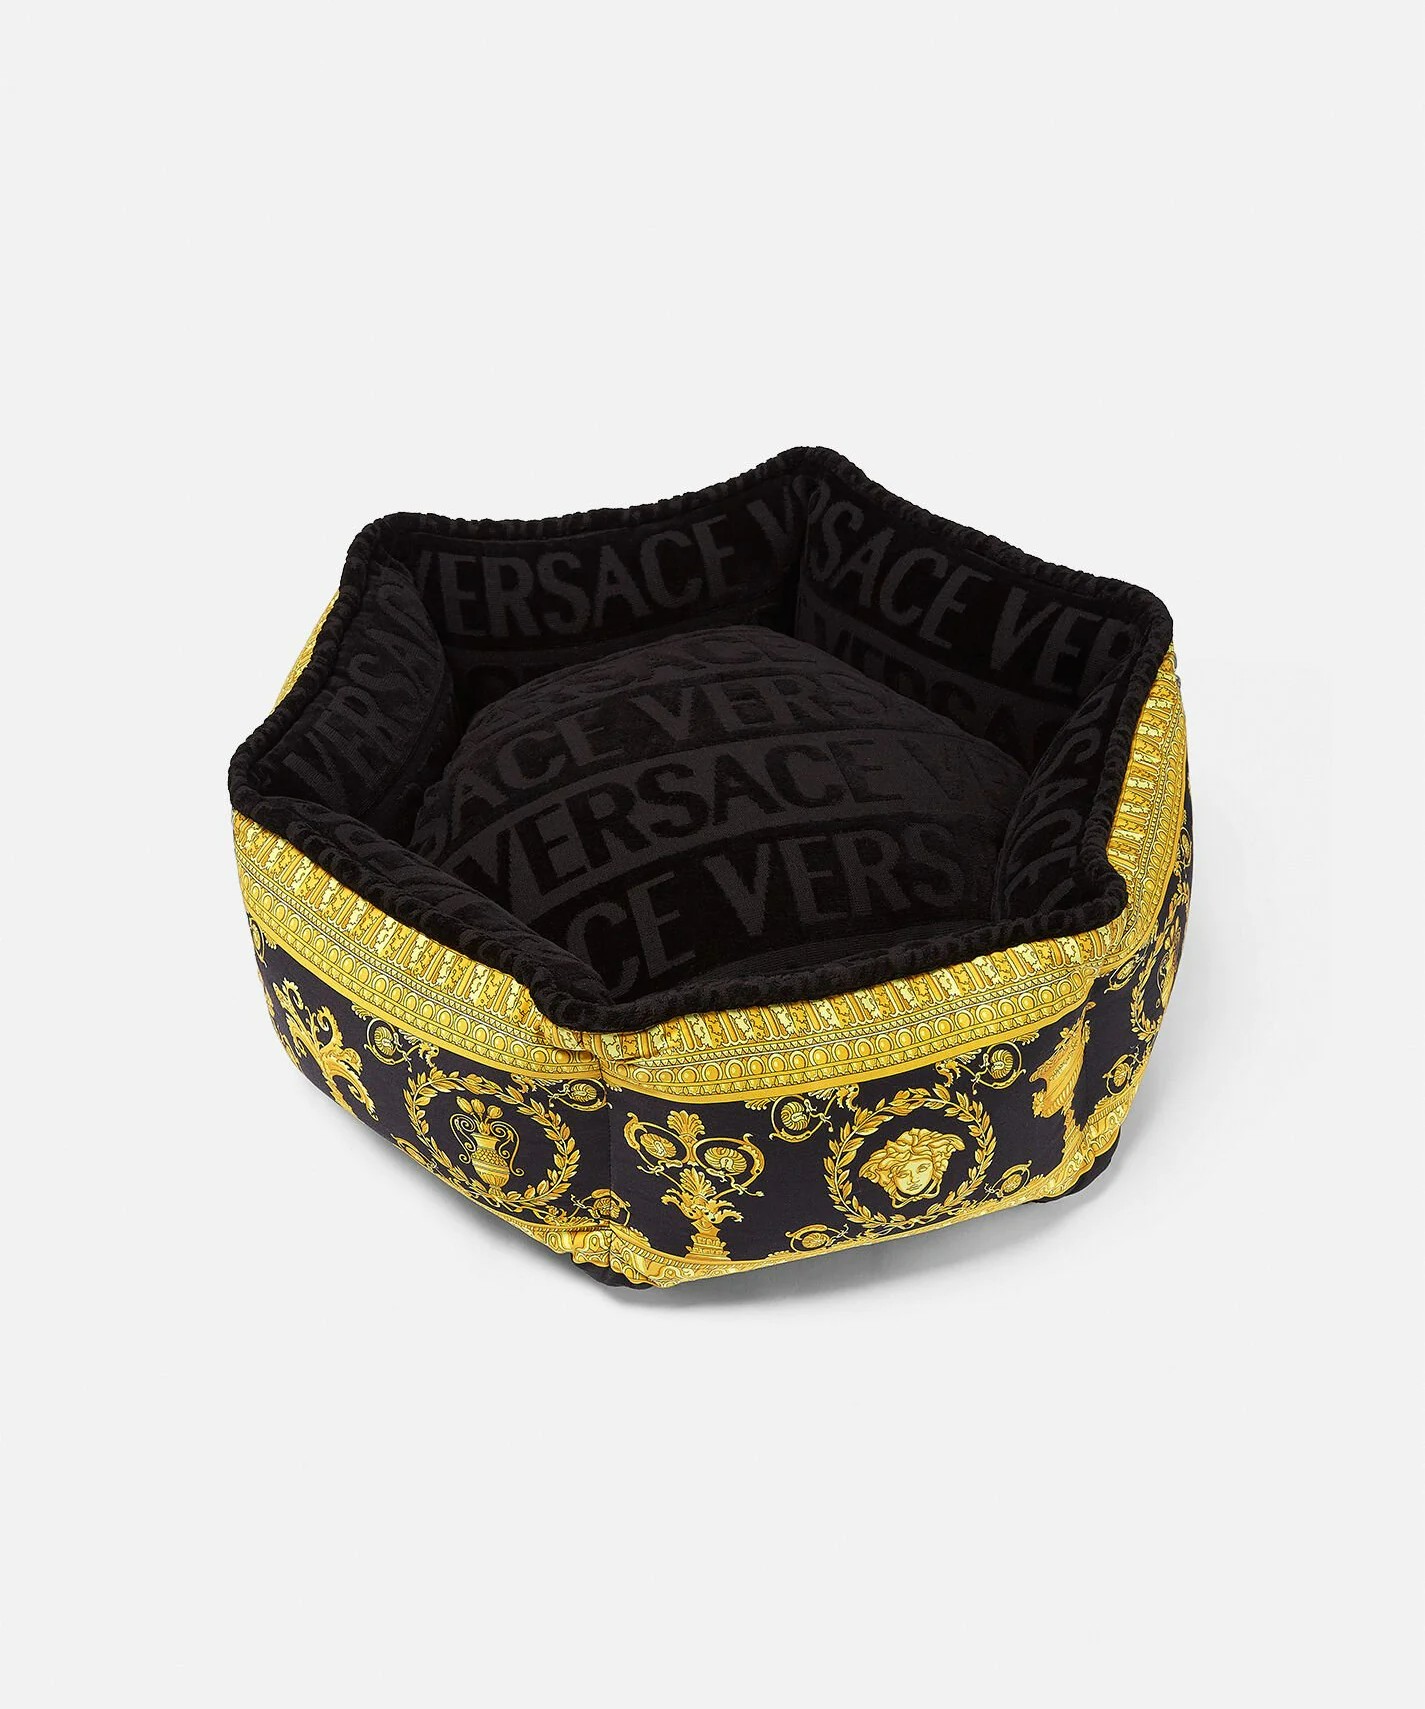 Versace dog bed in black and gold. The outer portion of the bed features the Versace logo print.